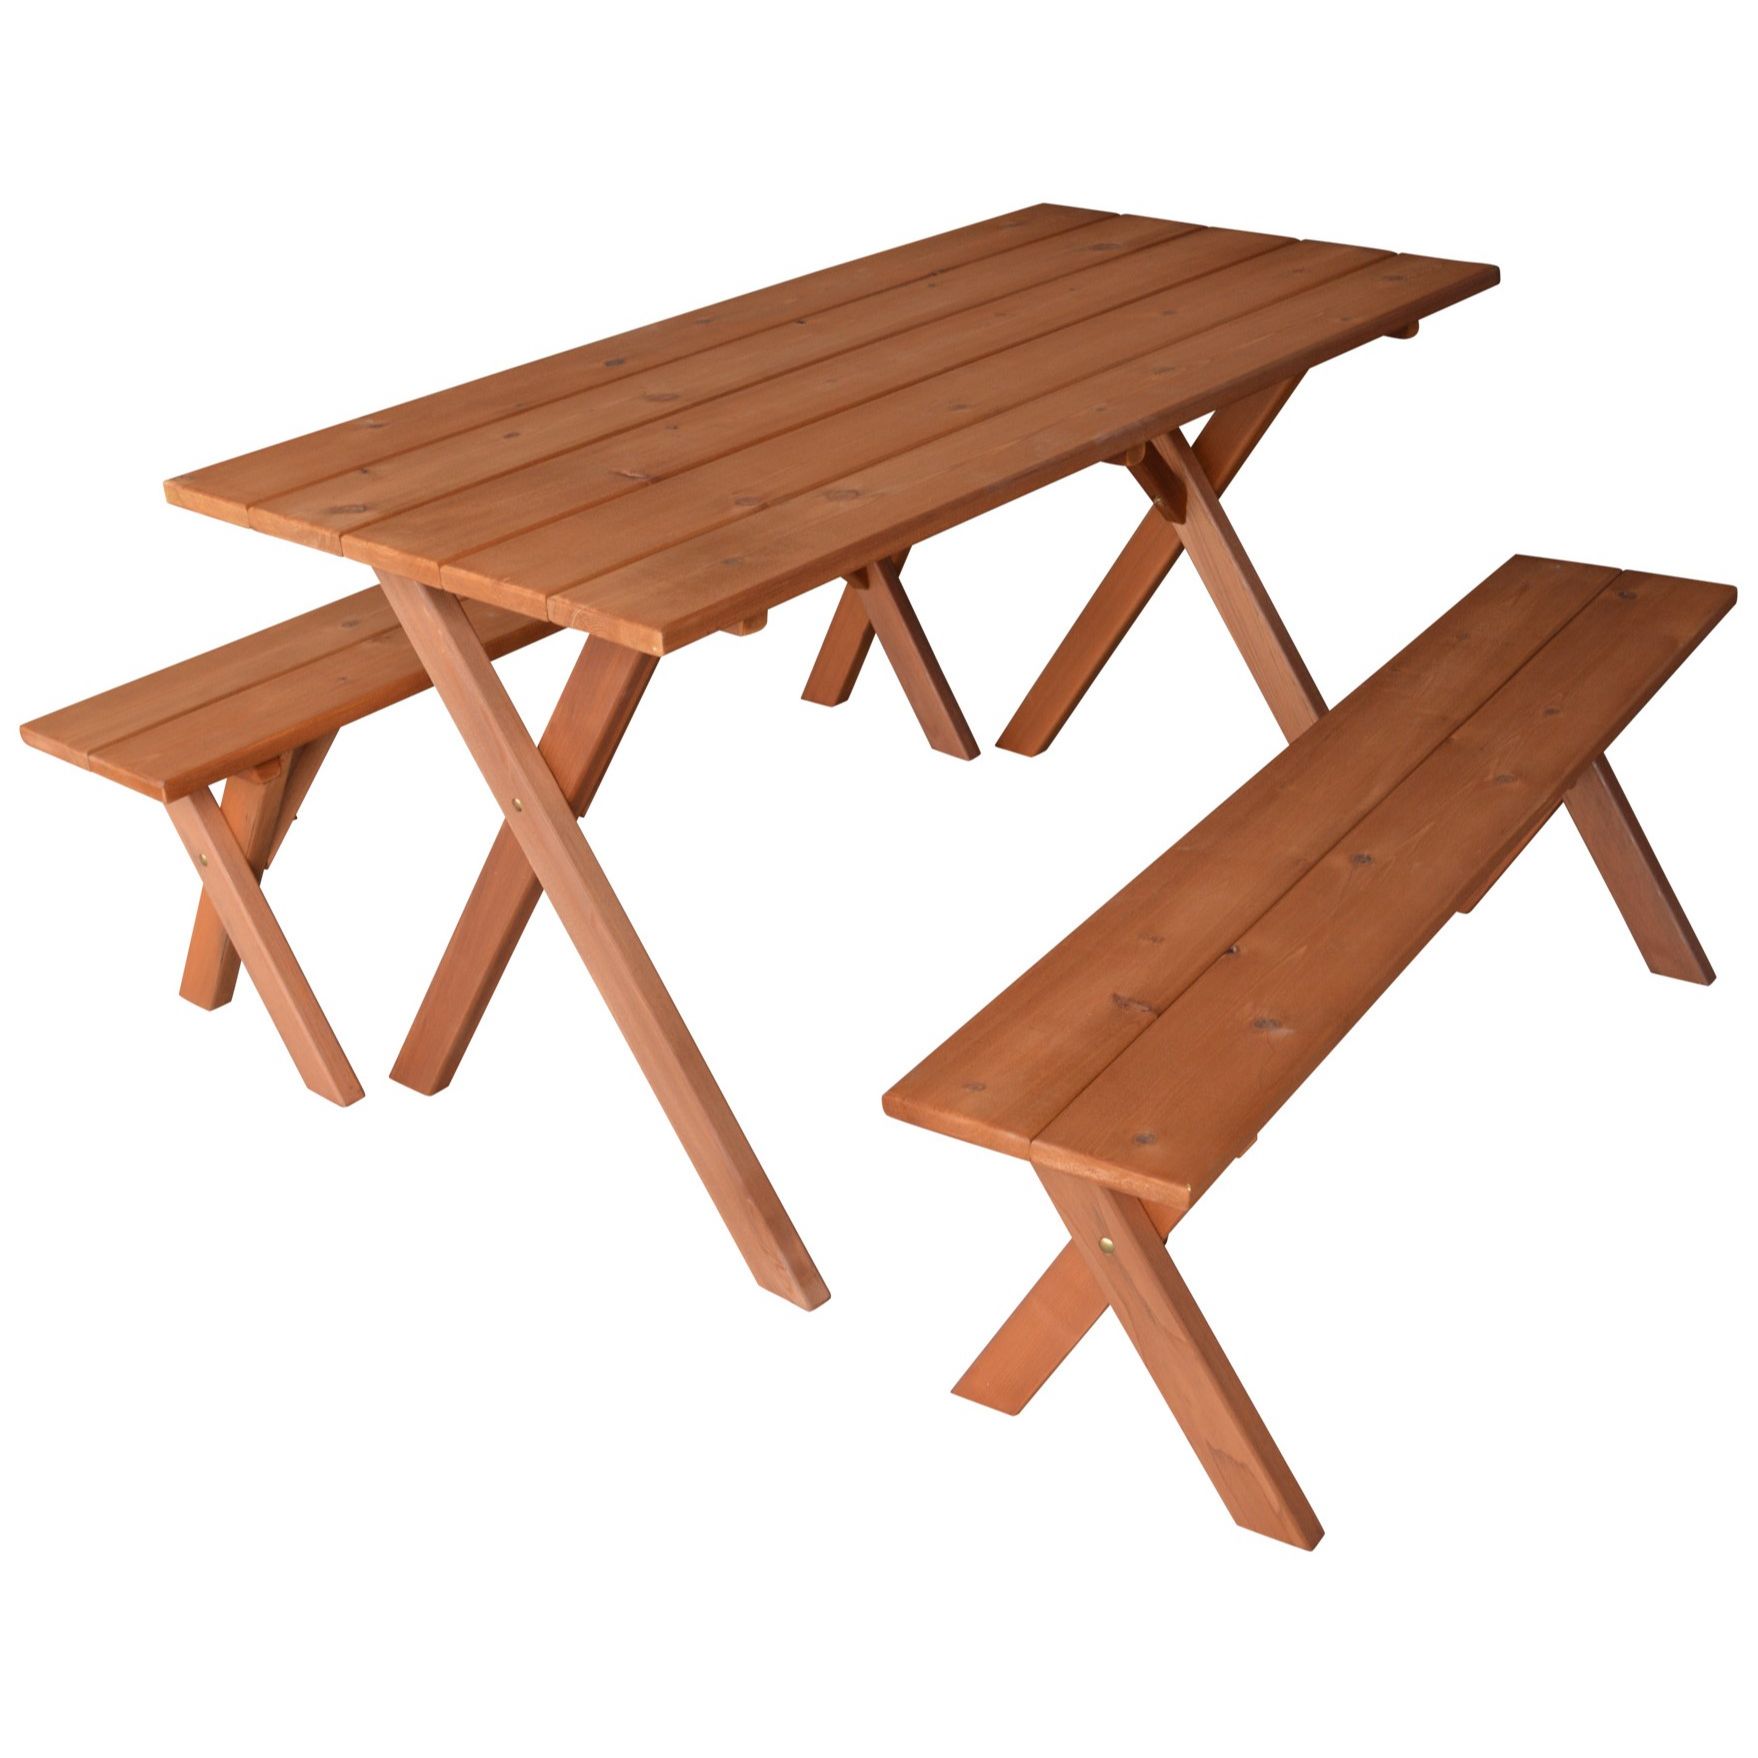 Cedar Economy Picnic Table with Two Detached Benches